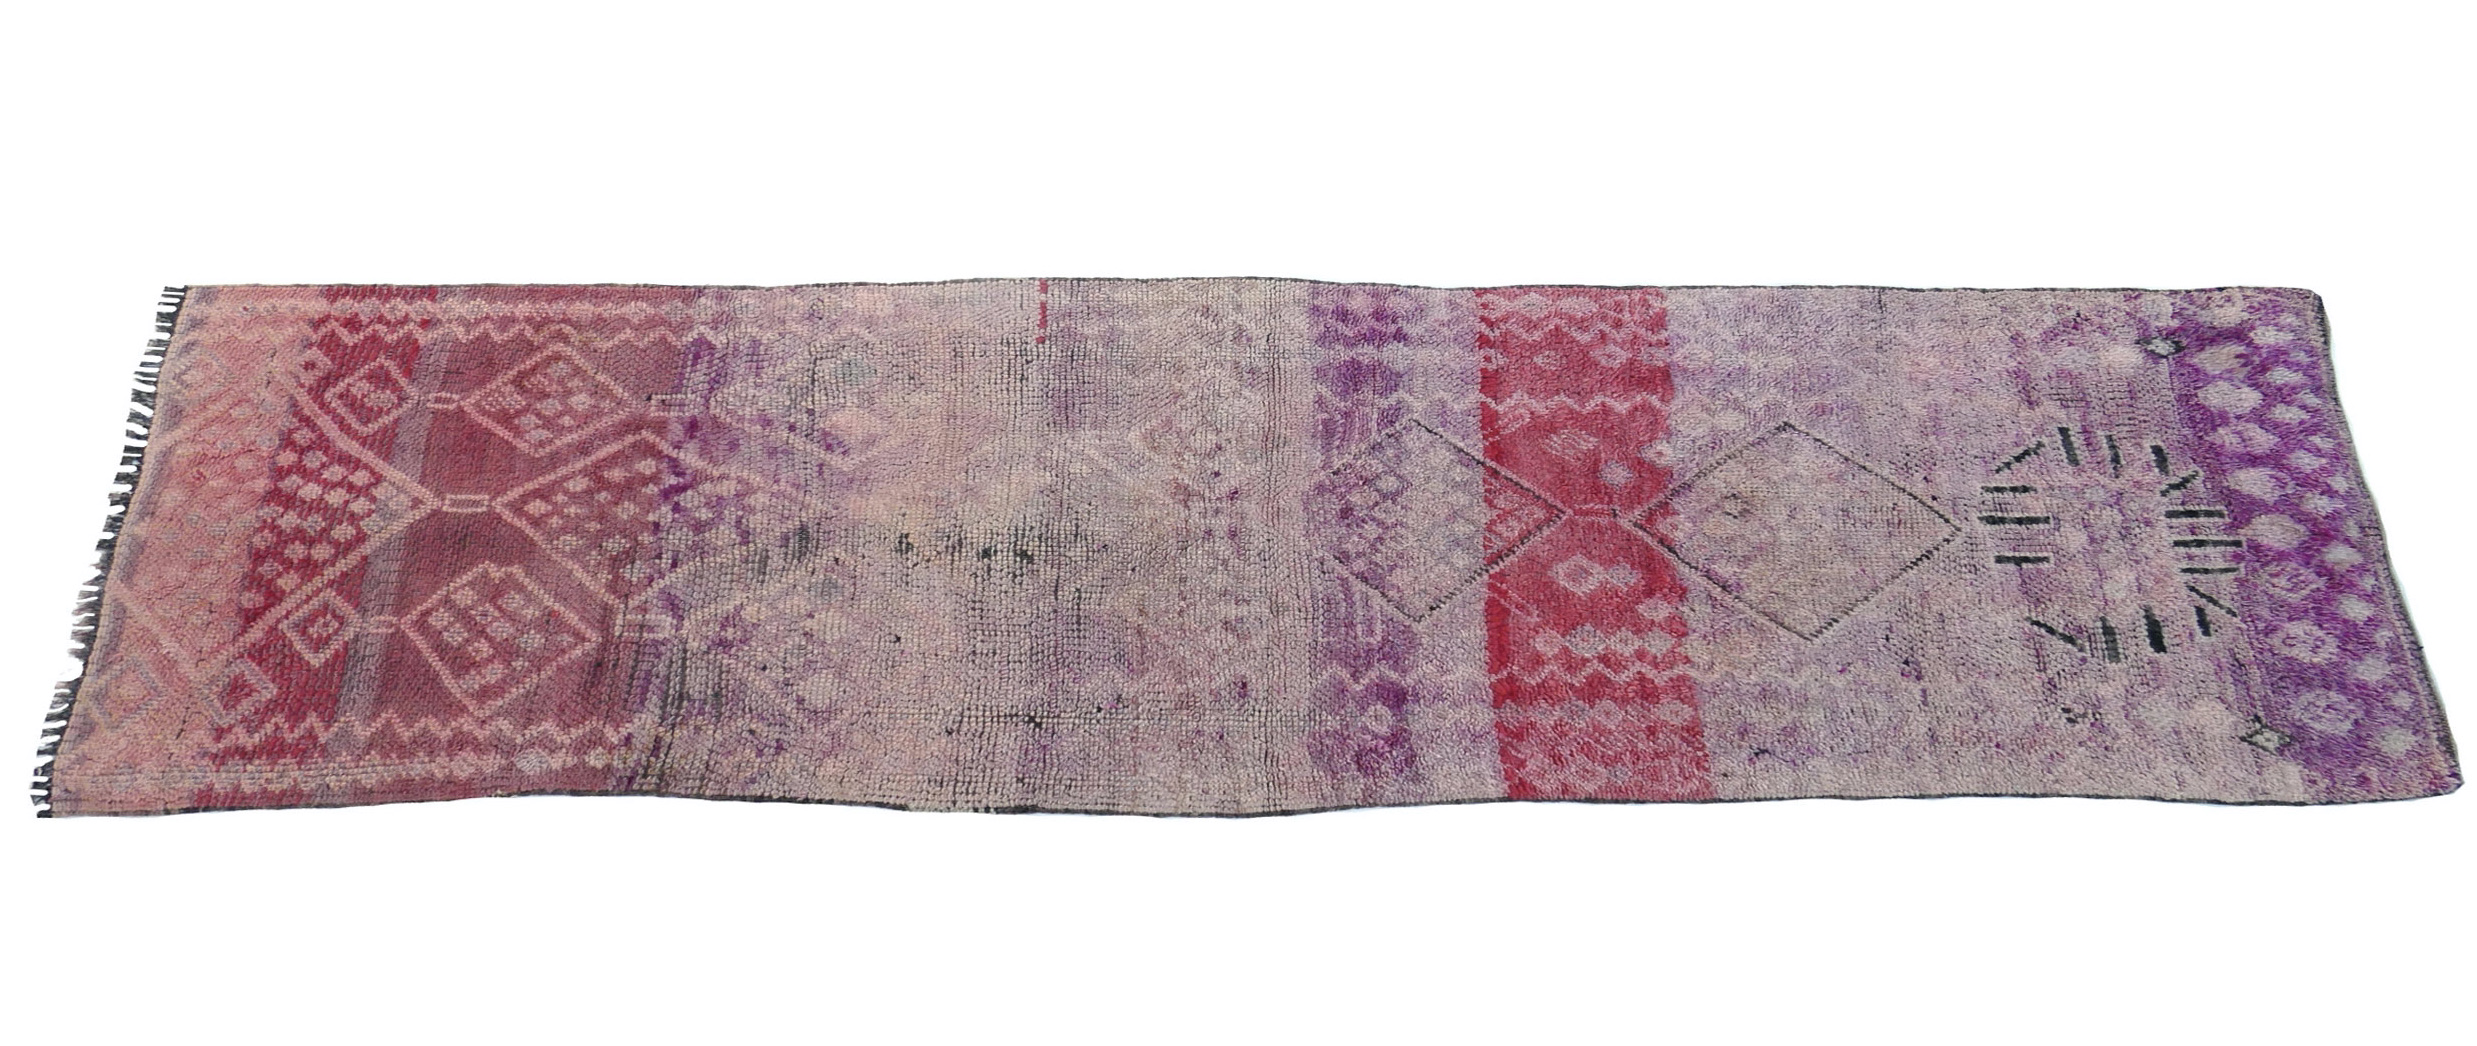 Circa 1960 Red and Lavender Runner